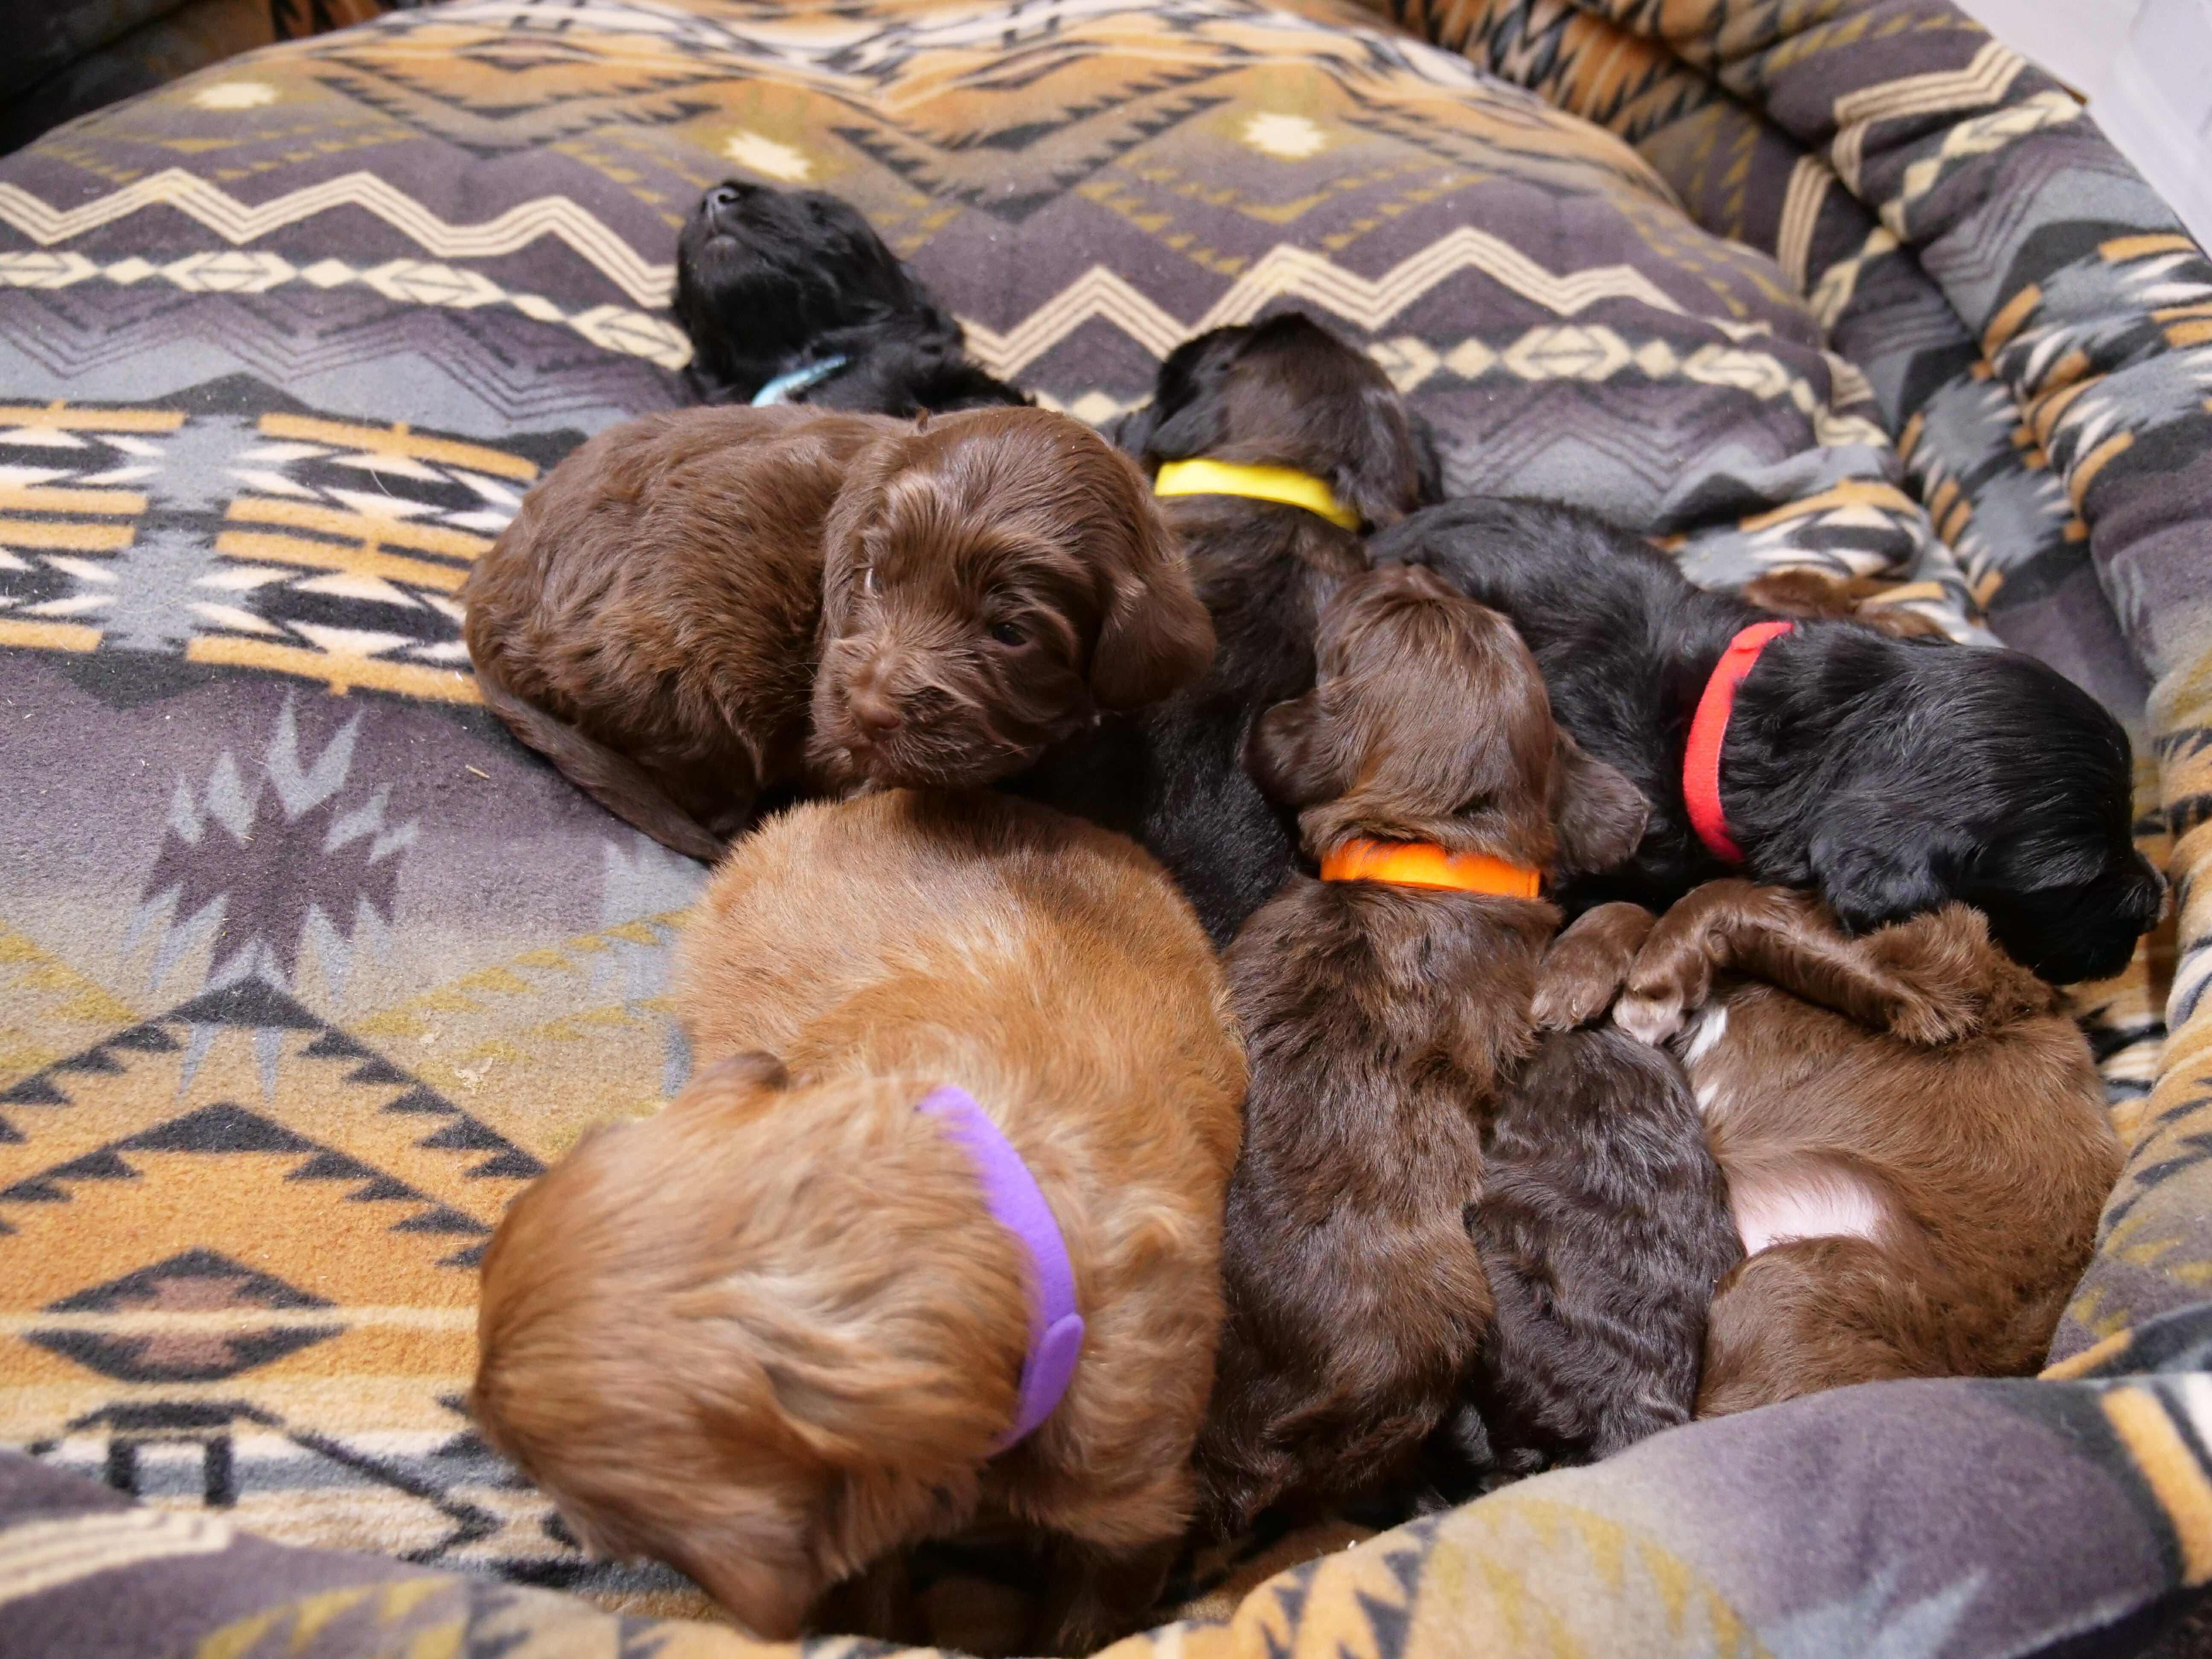 7 puppies in dog bed, one has its head up looking at camera